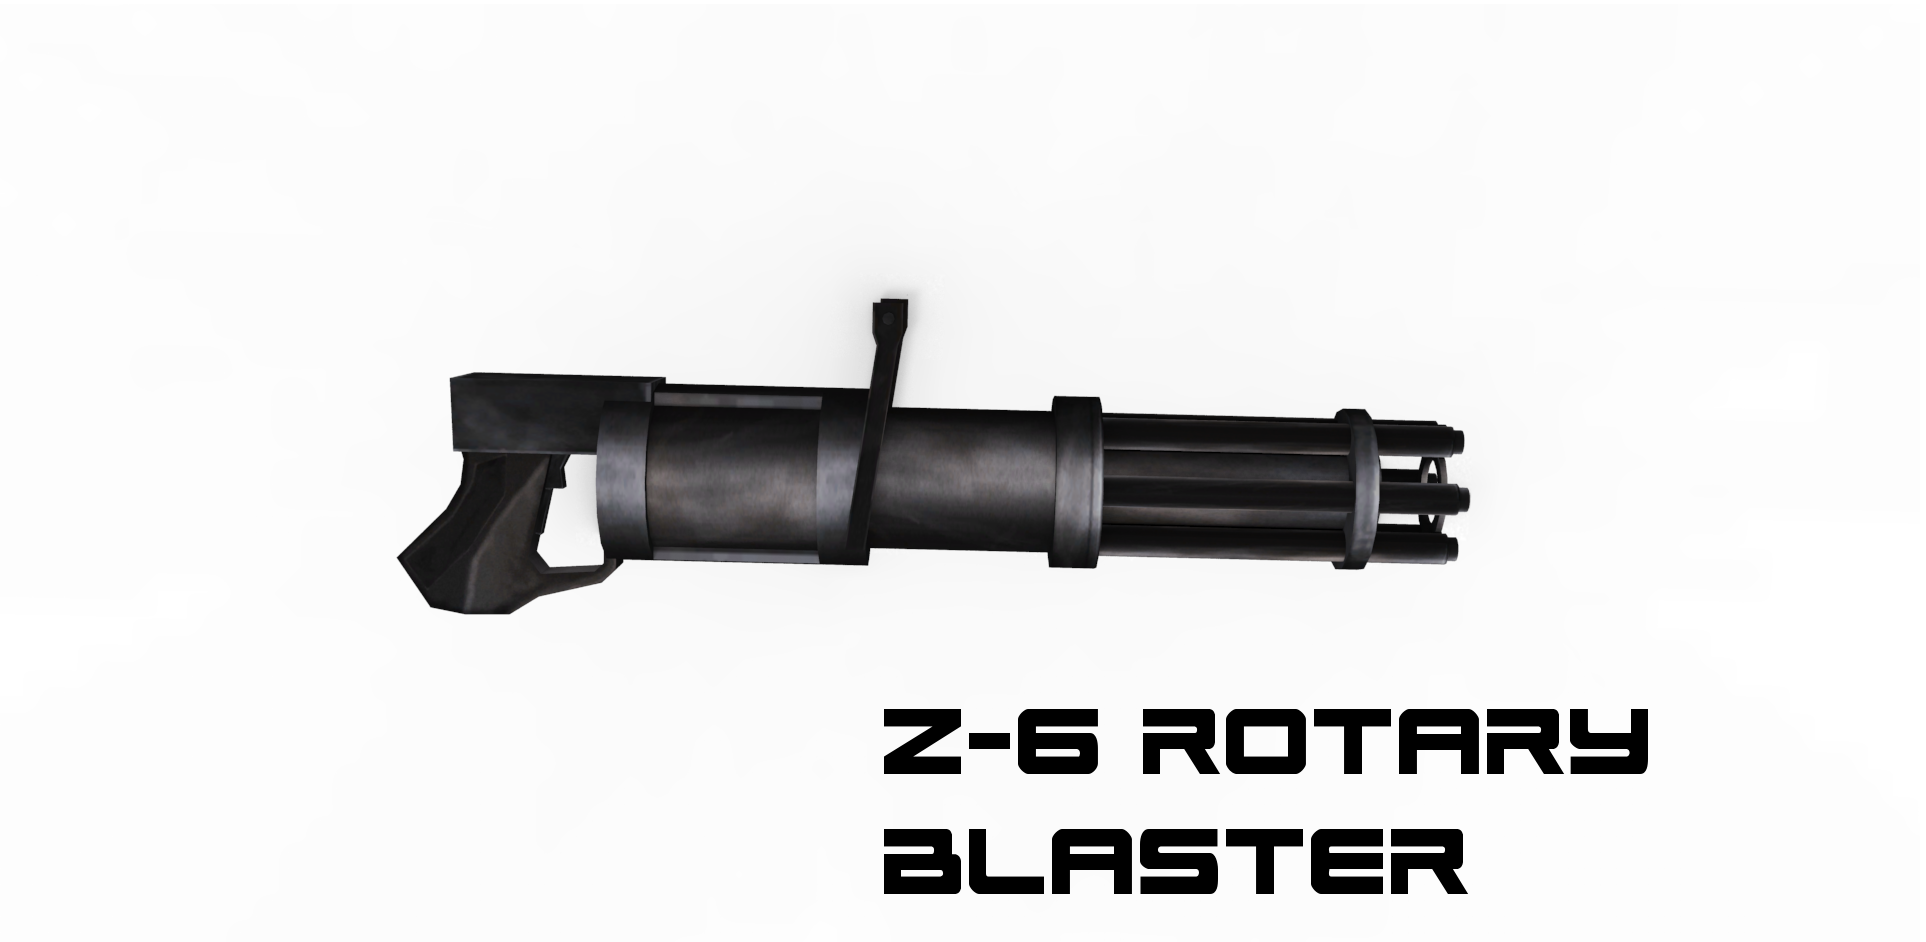 The Z-6 Rotary Blaster Cannon image - Star Wars - Bear Force II mod for